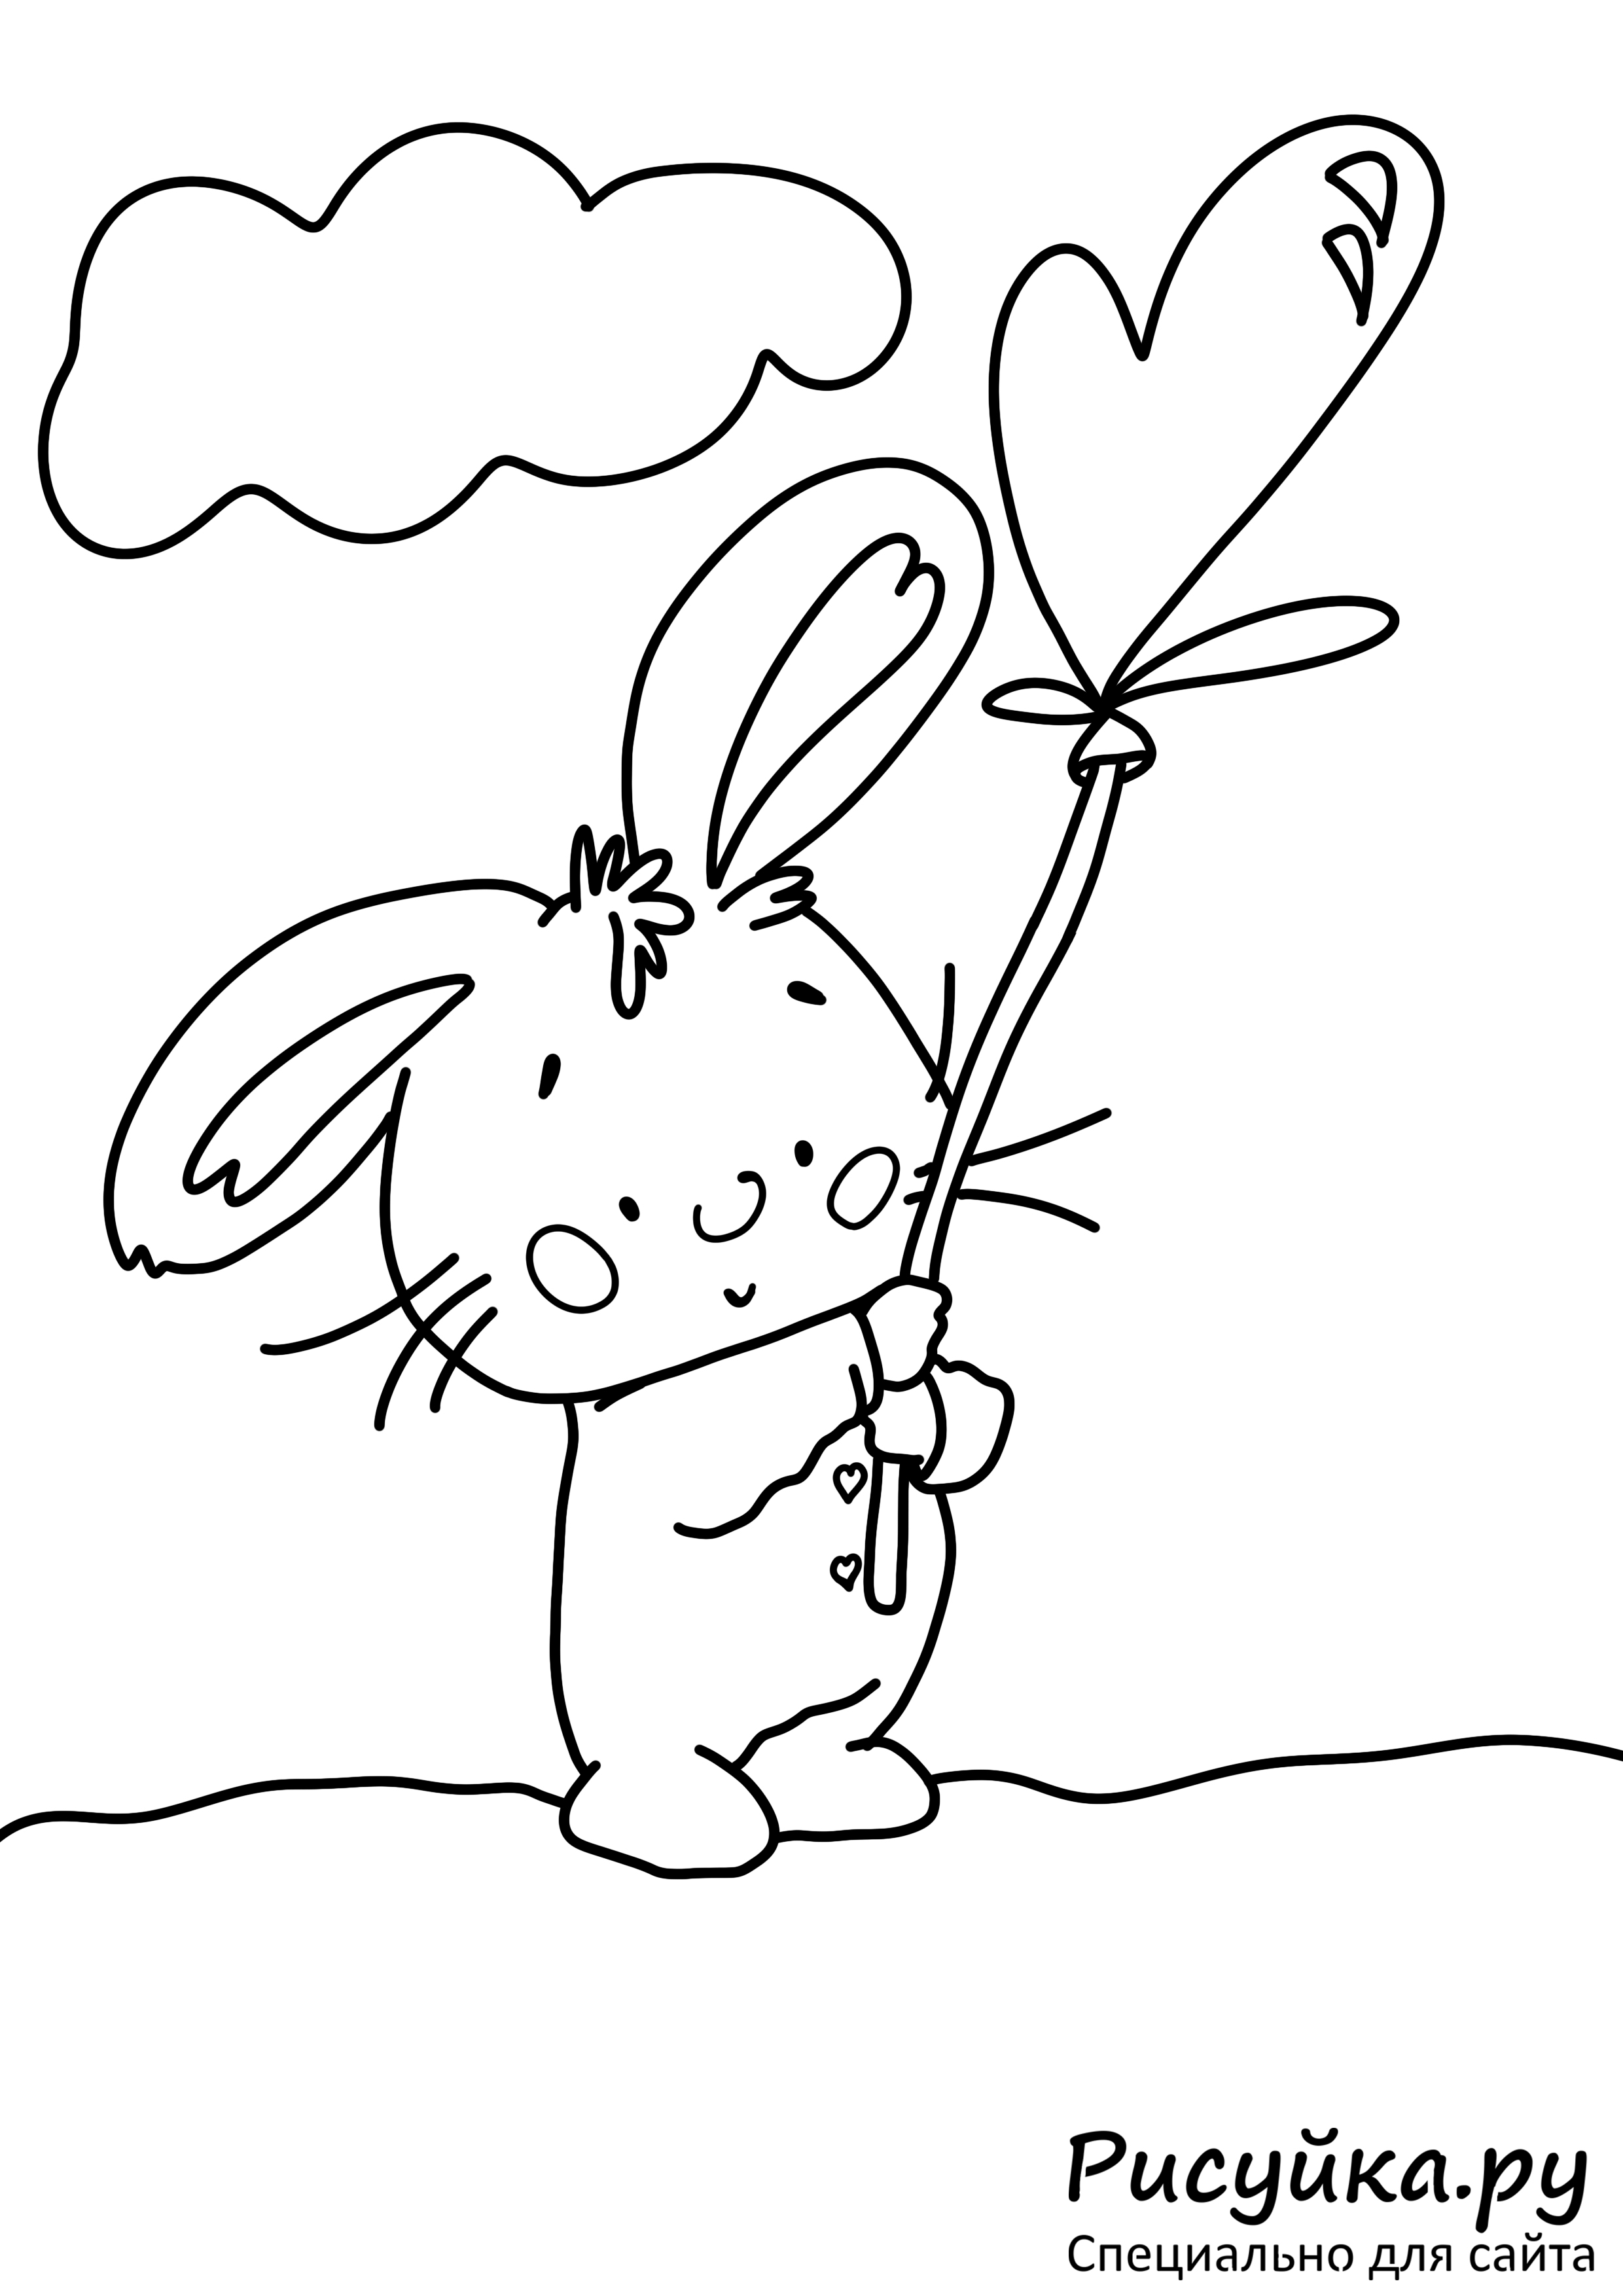 Witty rabbit with balloons